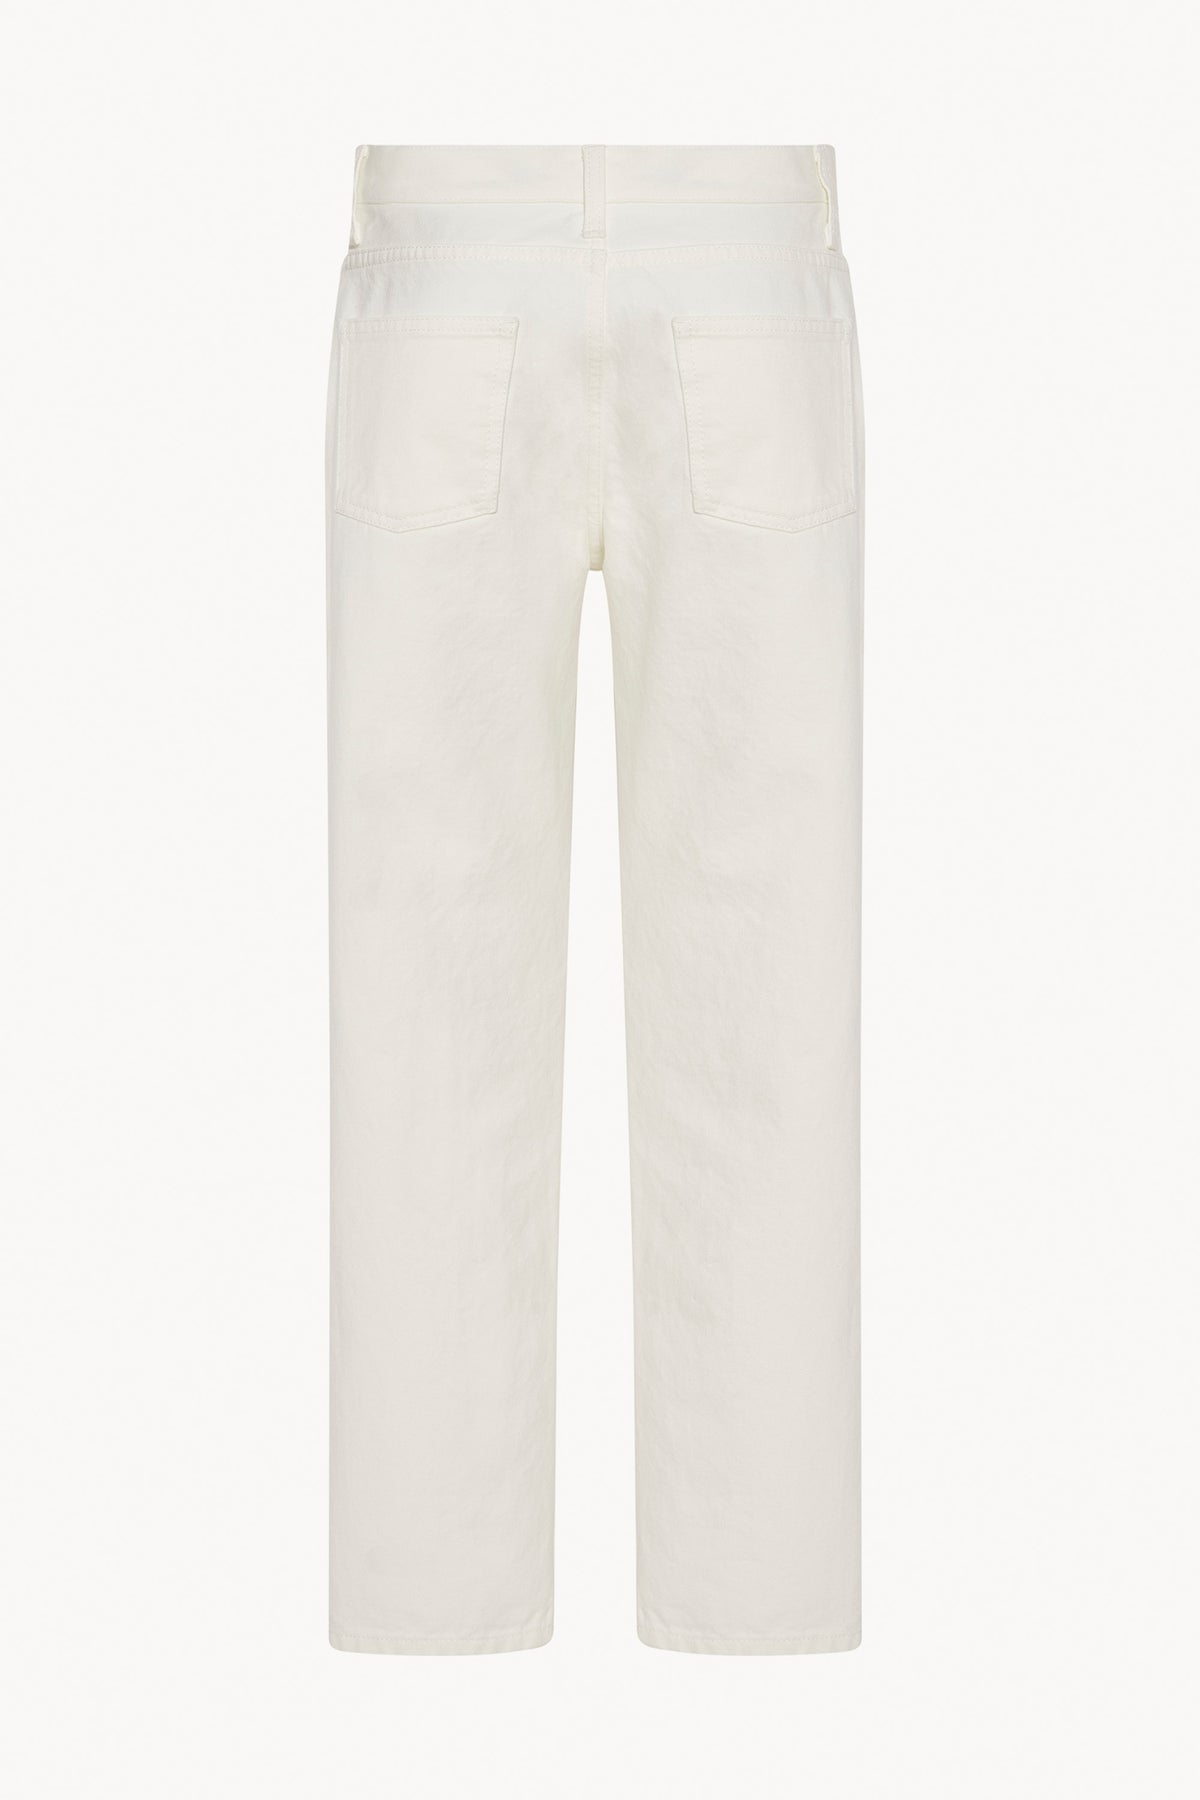 the-row-goldin-jeans-white-amarees